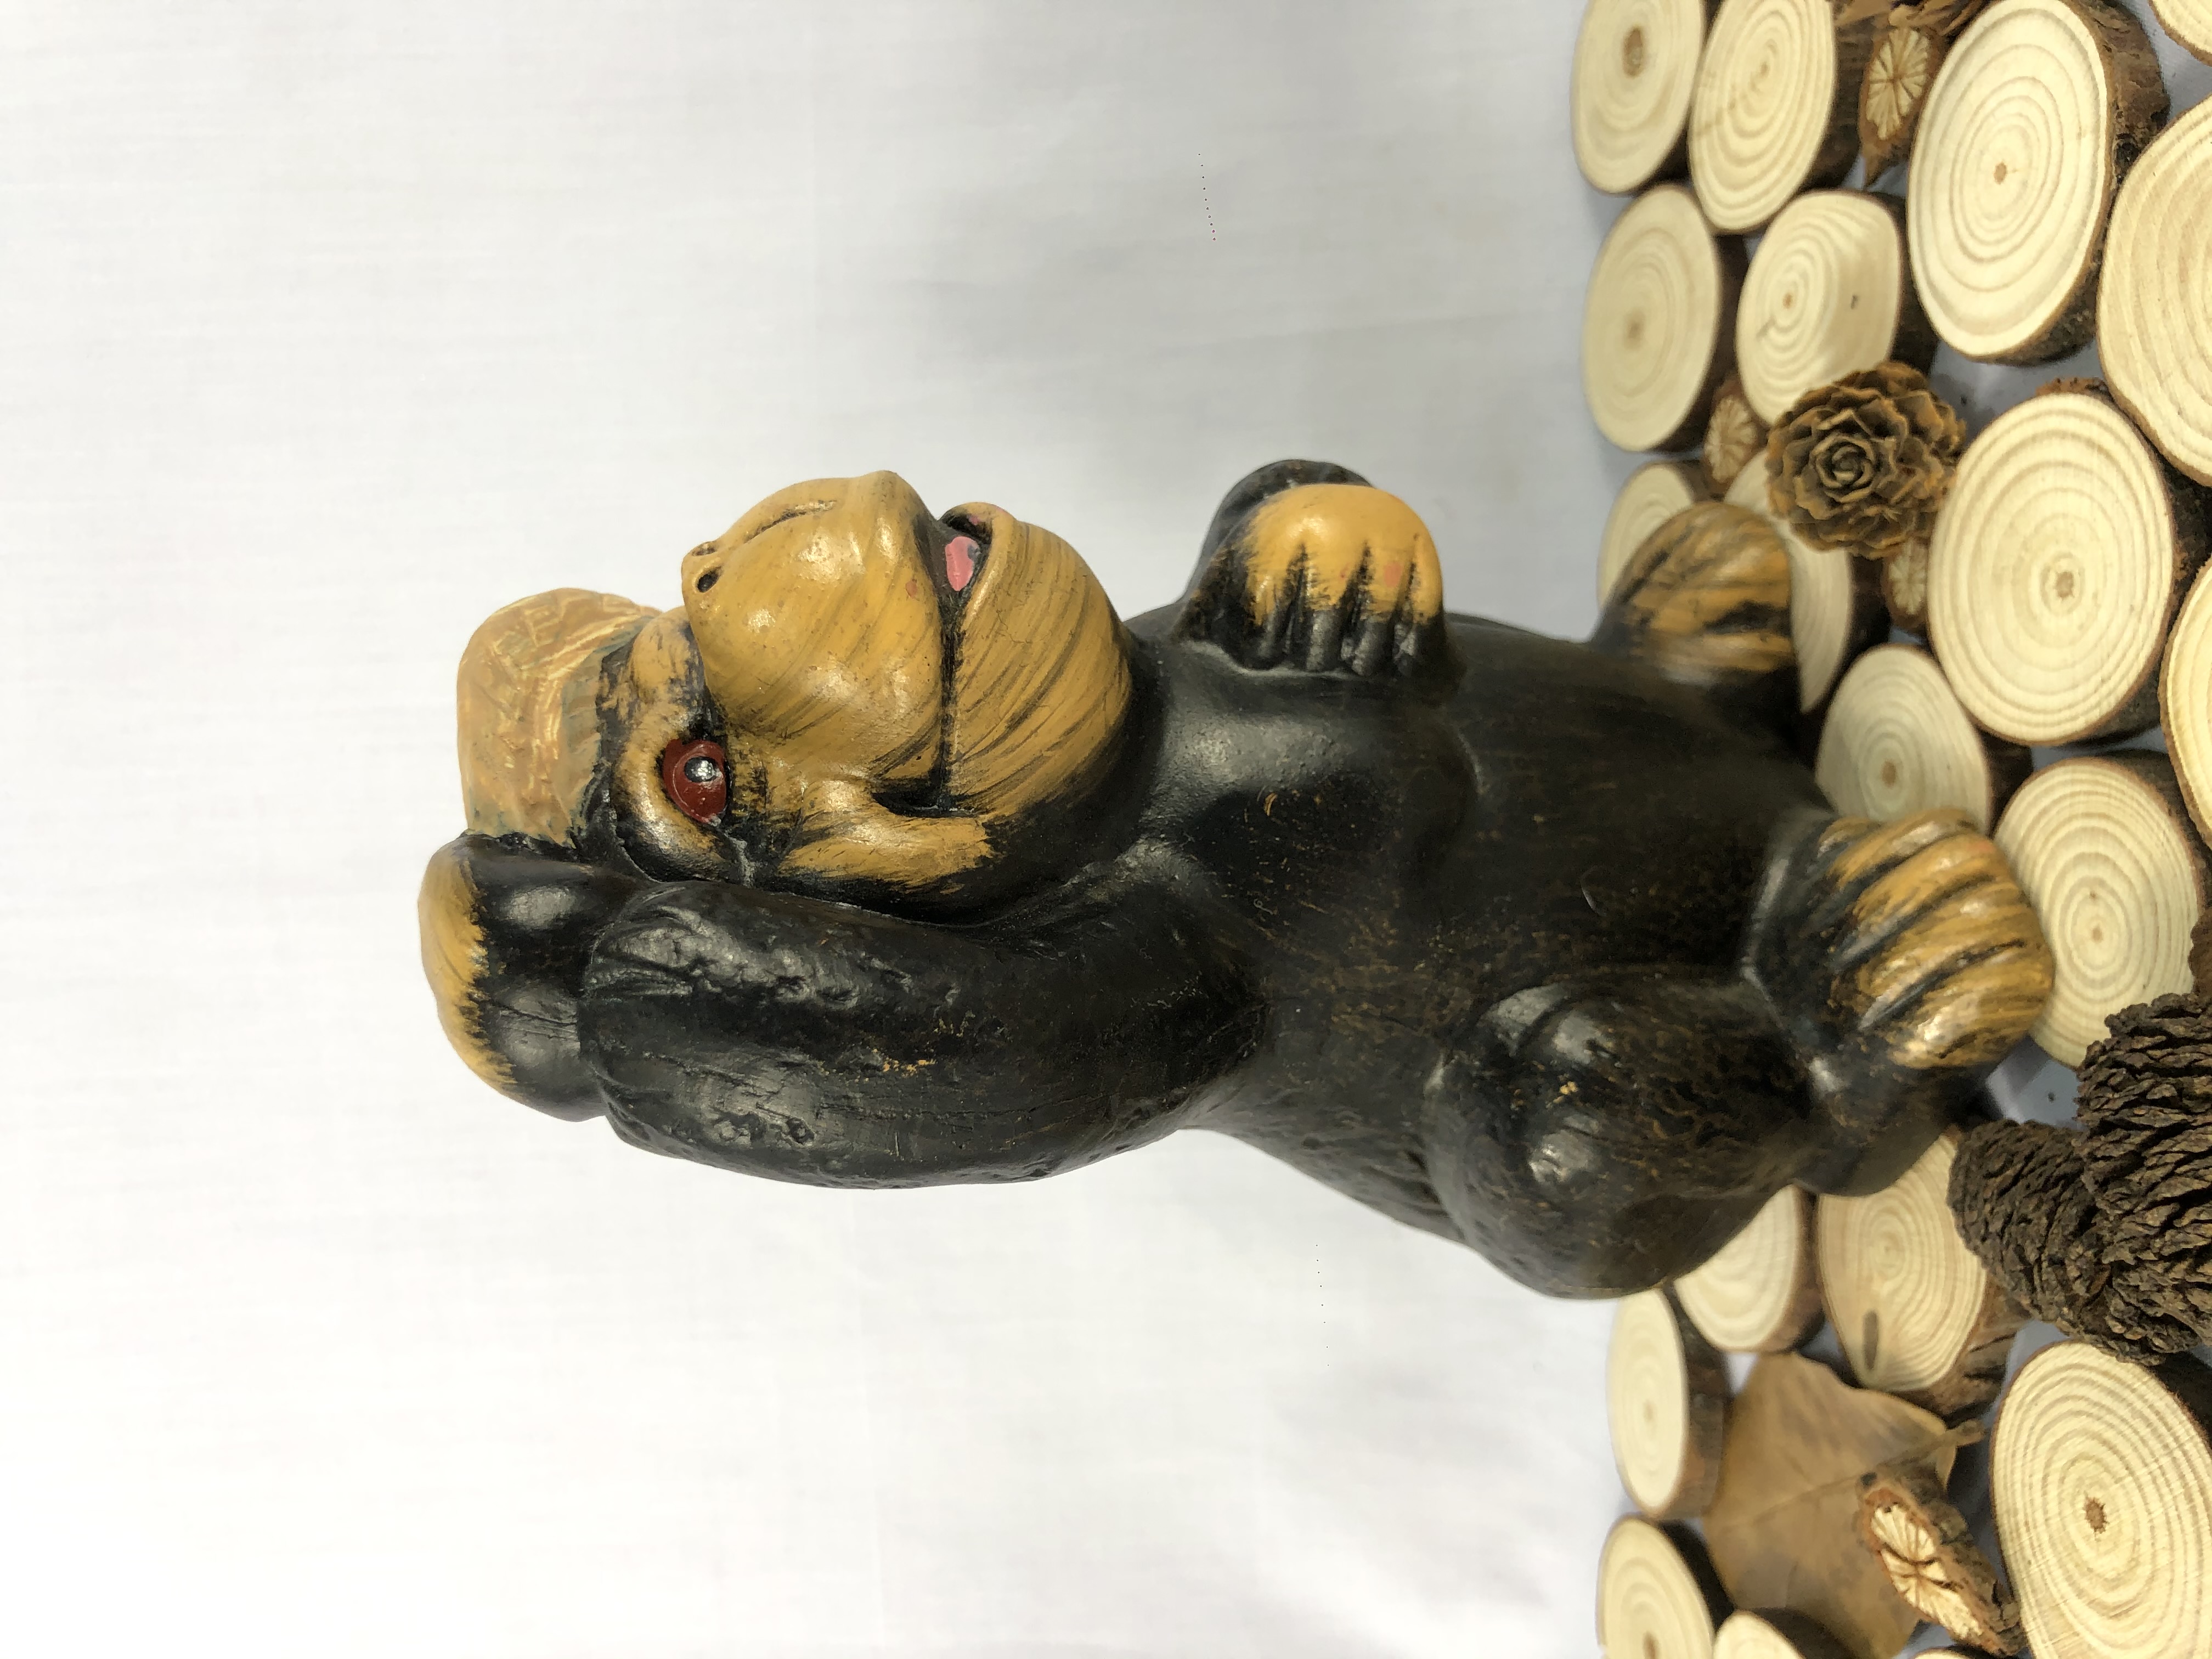 Cute Little Monkey Figurine Display - Home Decor, Collection, Gift